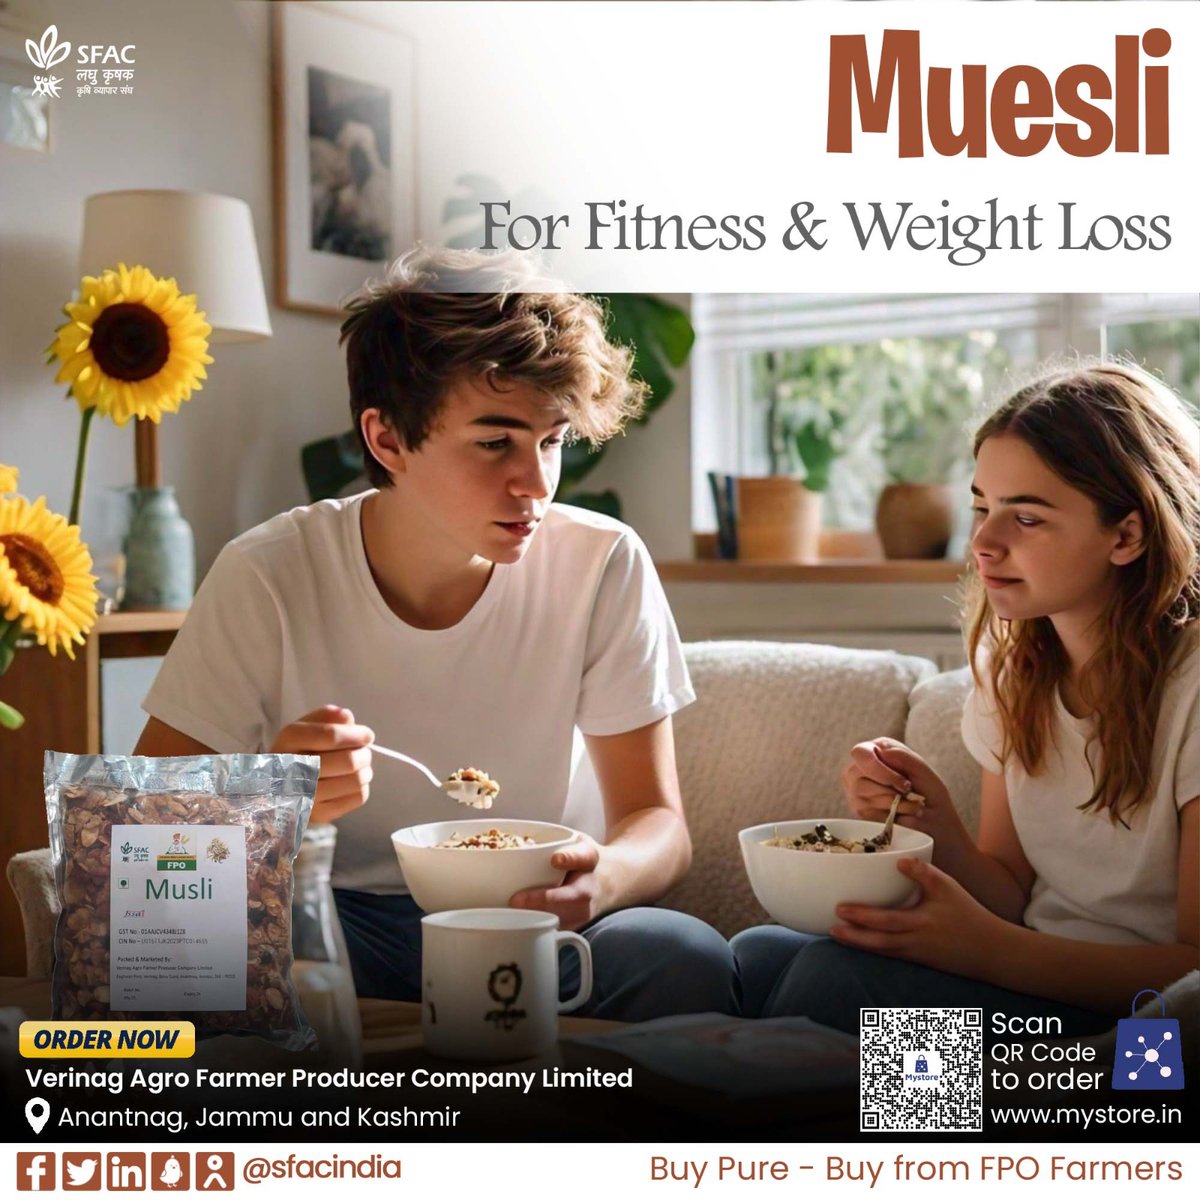 Muesli from J & K FPO- taste, nutrition, purity, convenience- all in one.
For a bright, energy-boosting start to the day, order now
👇

mystore.in/en/product/mus…

😋

@yogrishiramdev #VocalForLocal #healthychoices #healthyeating #healthyhabits #tastyrecipes #tastybreakfast #tasty